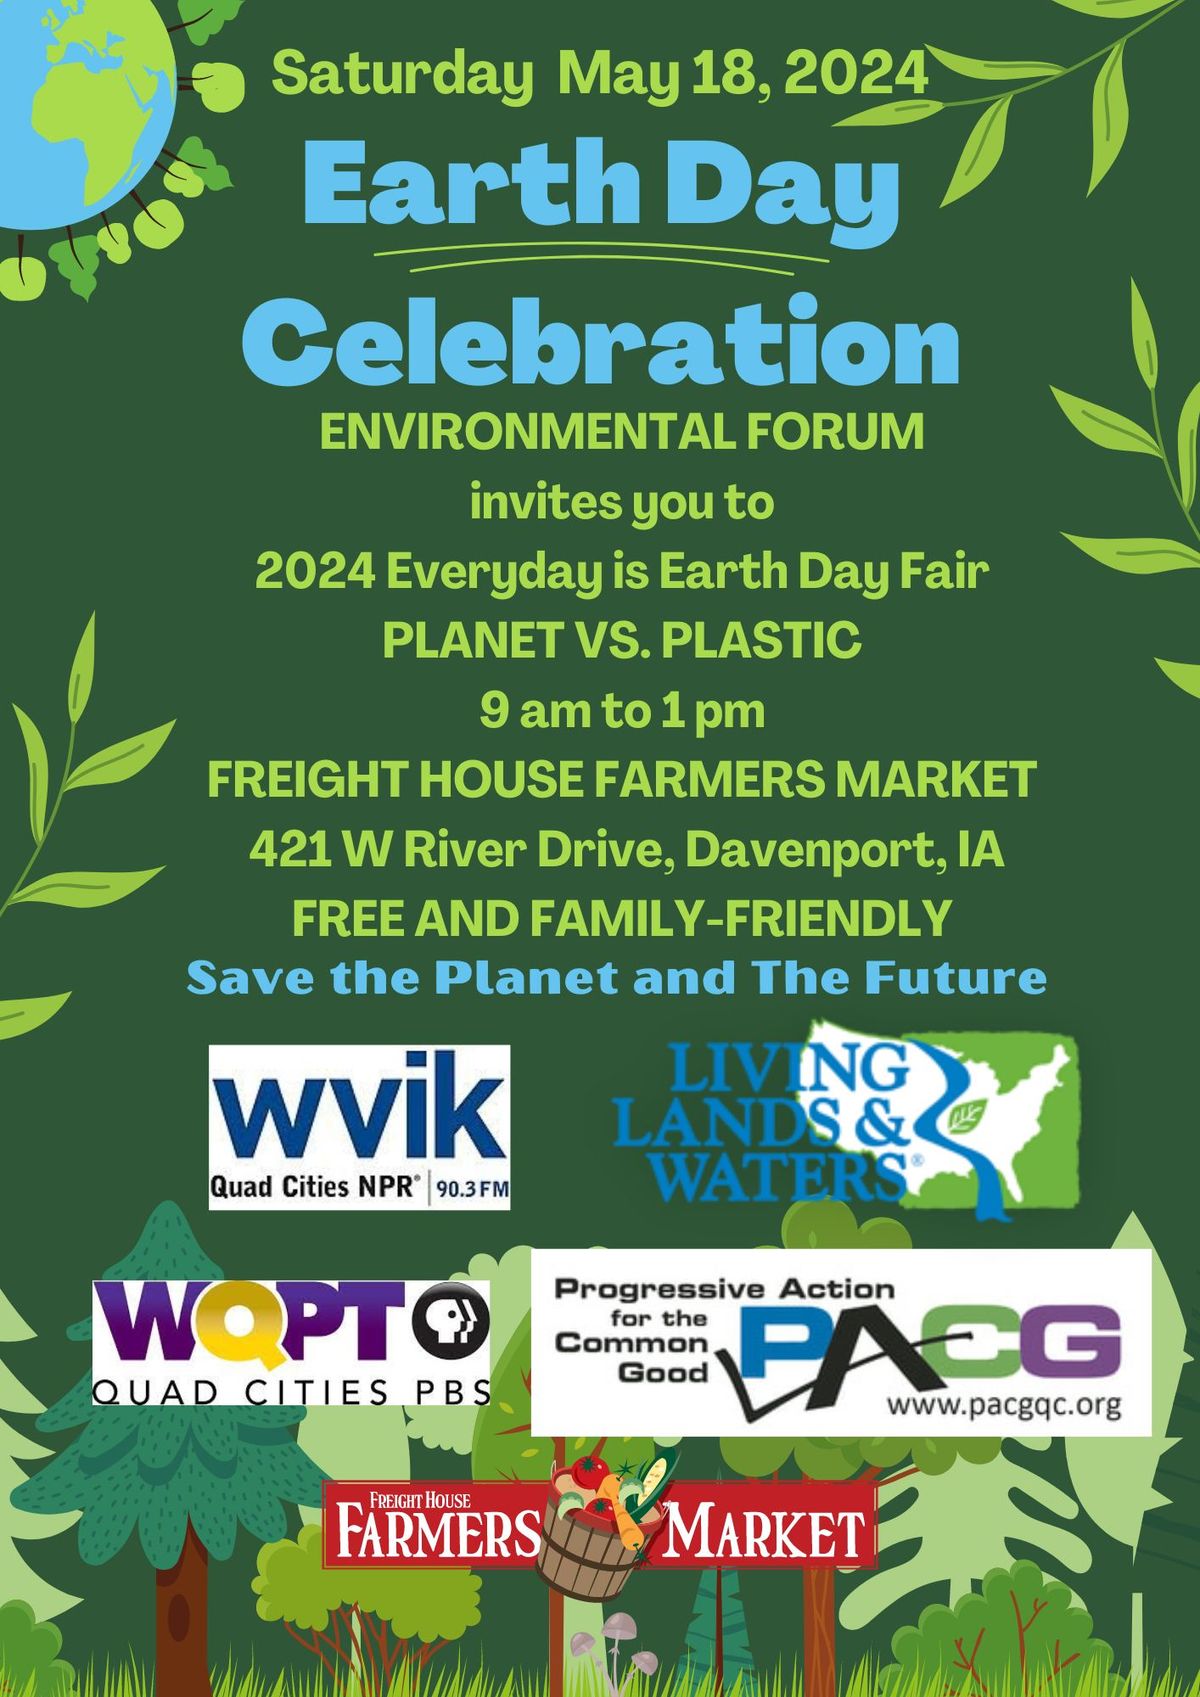 Earth Day Celebration at the Freight House Farmers Market